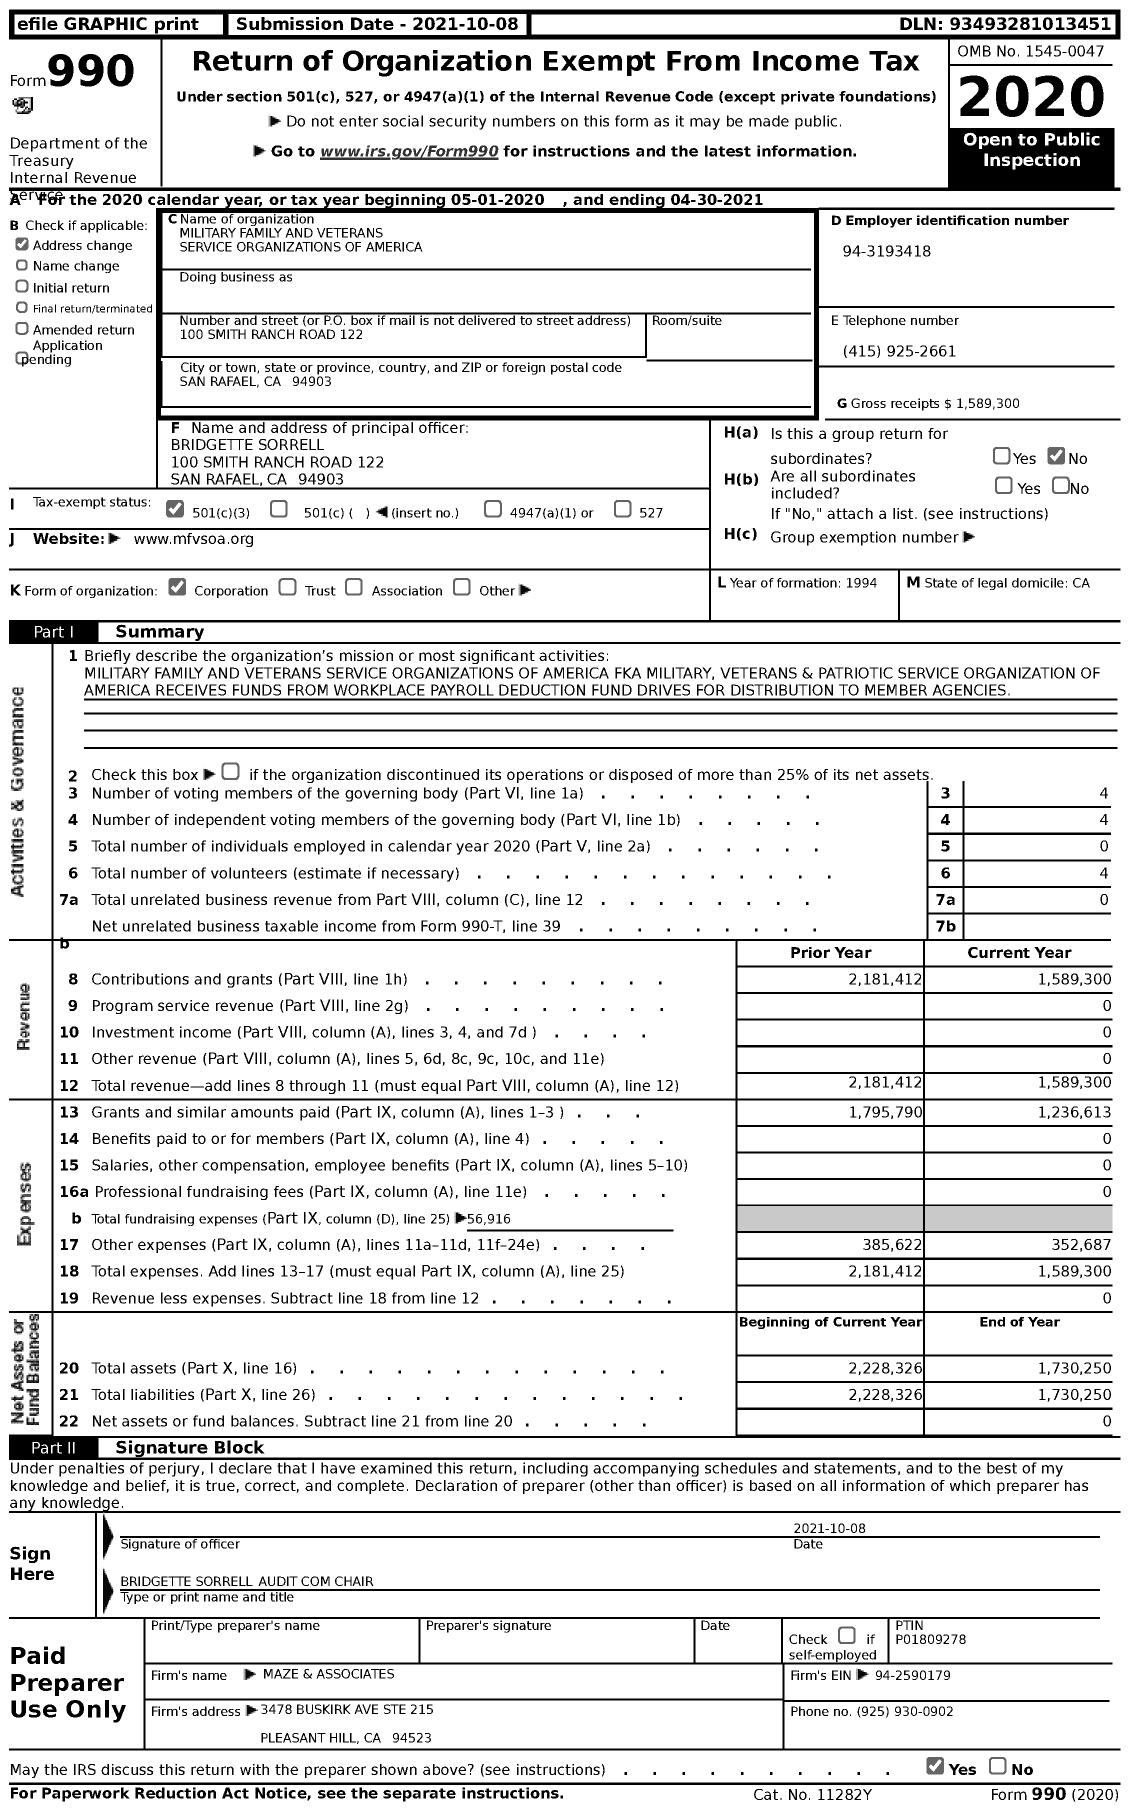 Image of first page of 2020 Form 990 for Military Family and Veterans Service Organizations of America (MFVSOA)